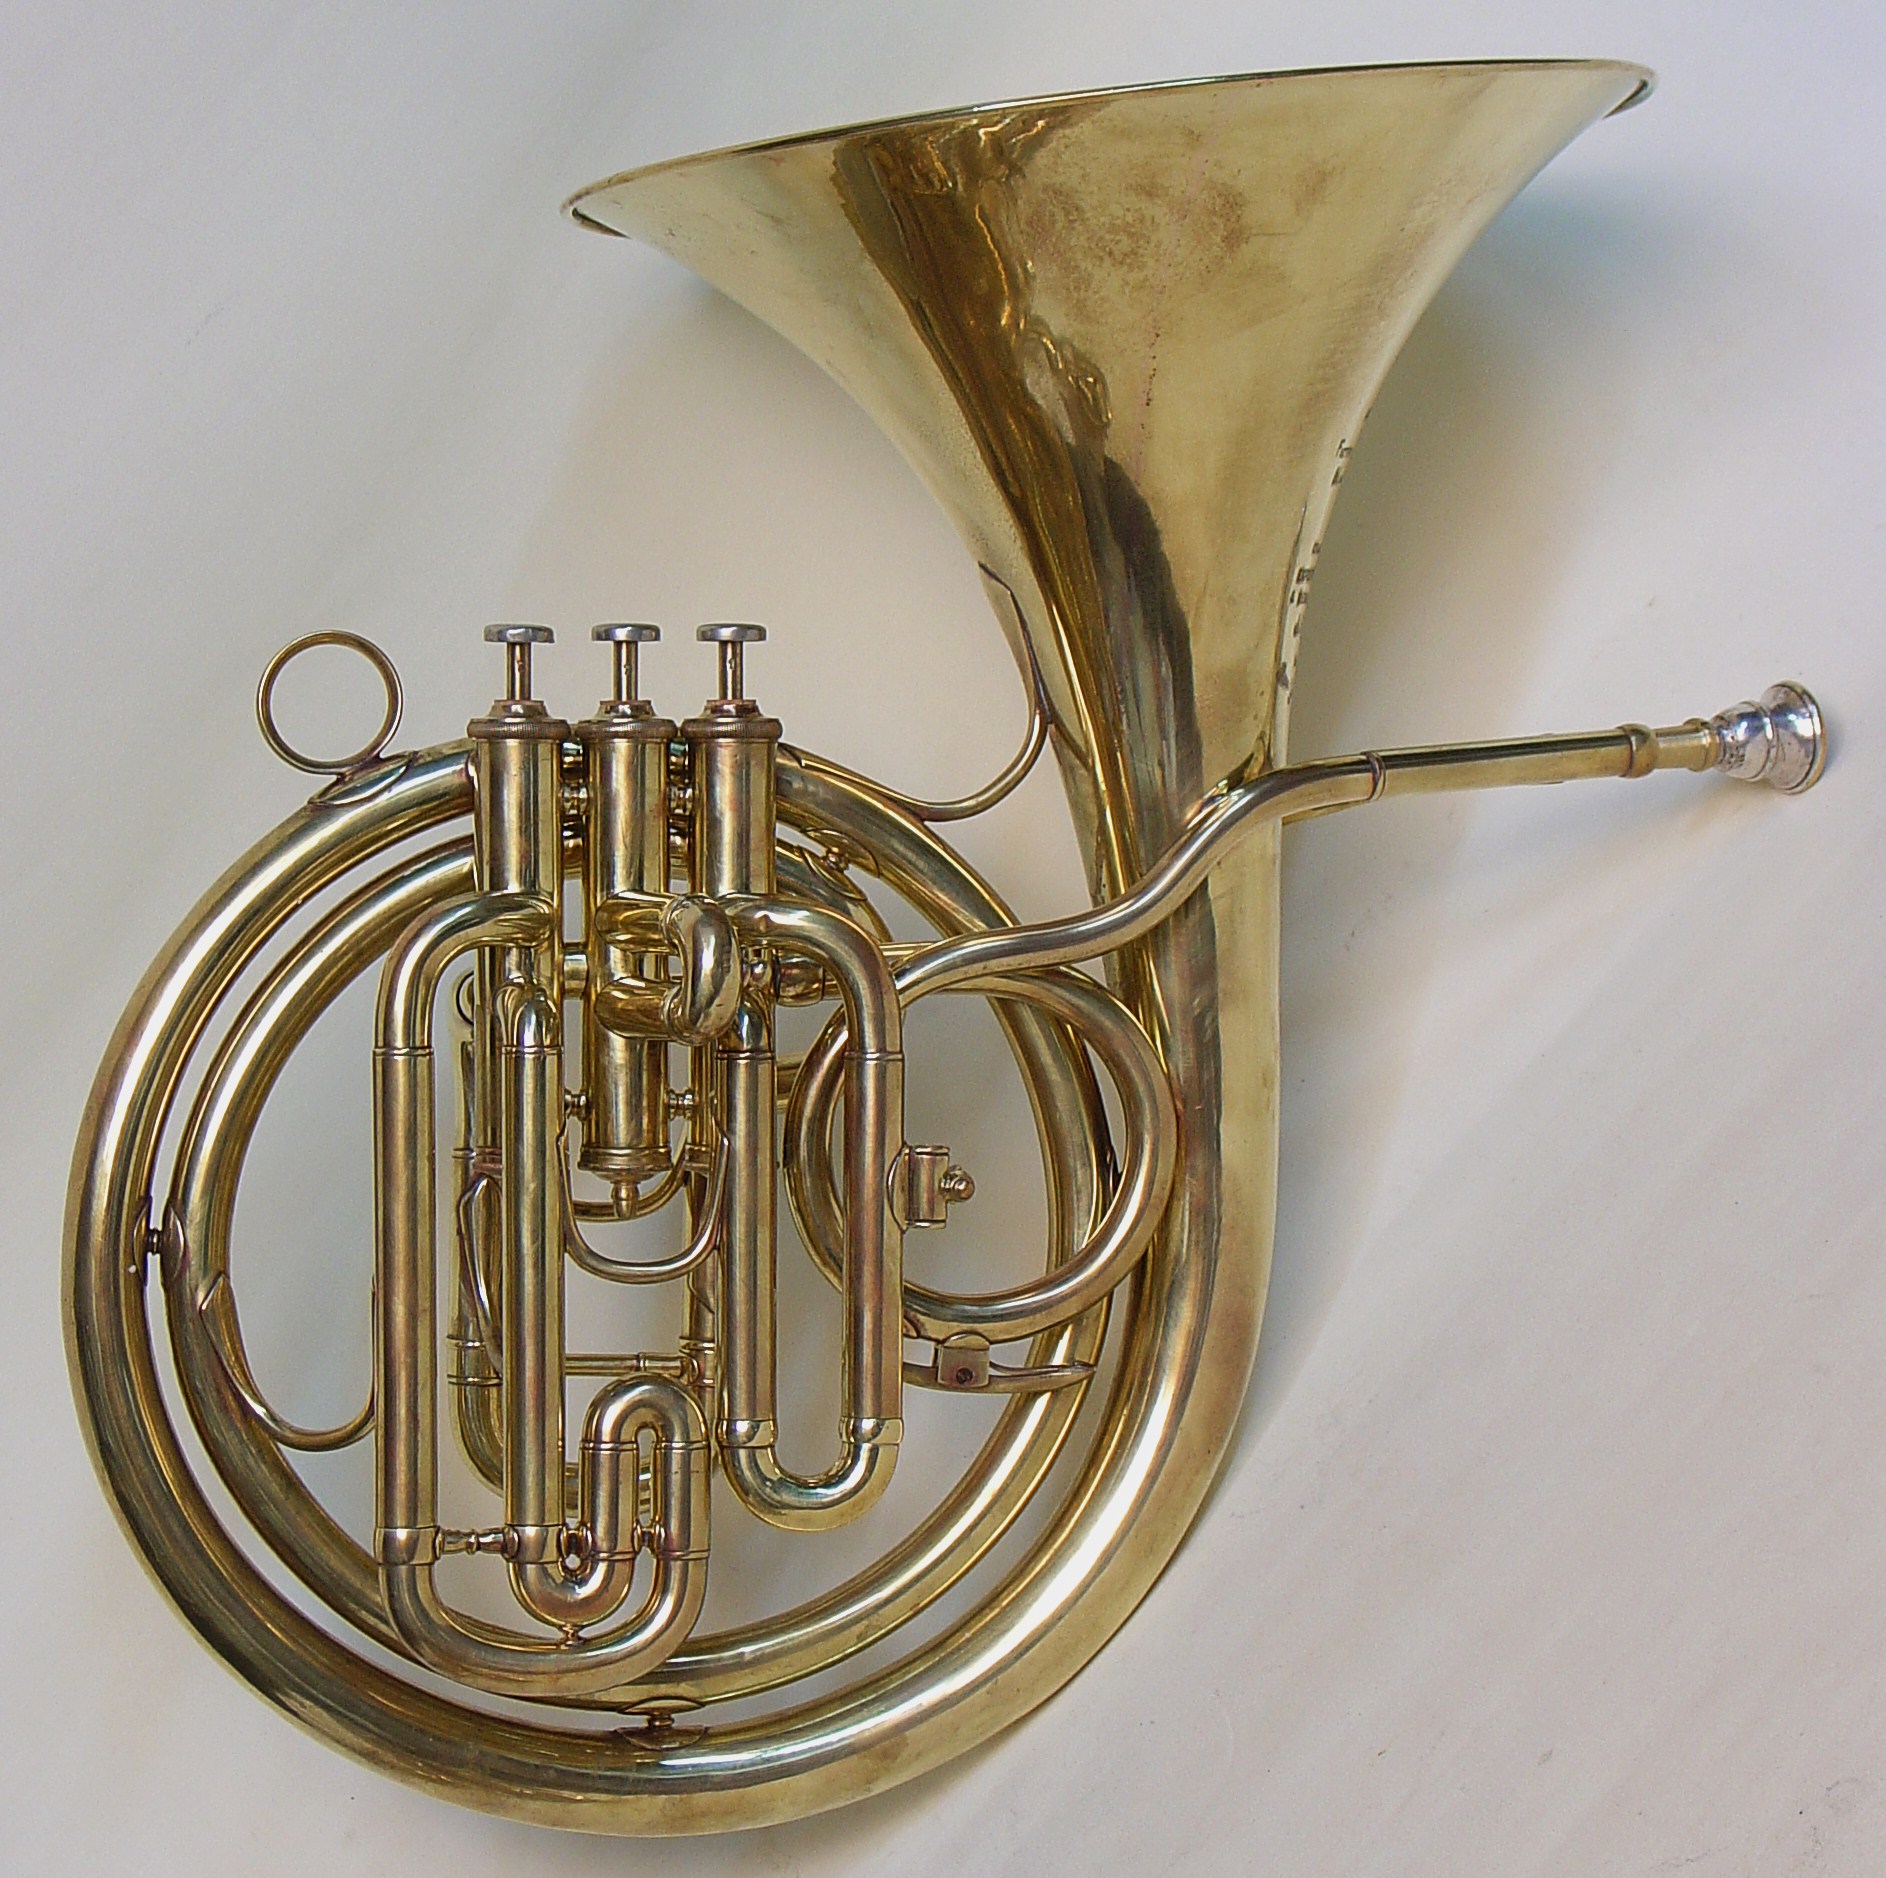 Courtois "Melody Horn"